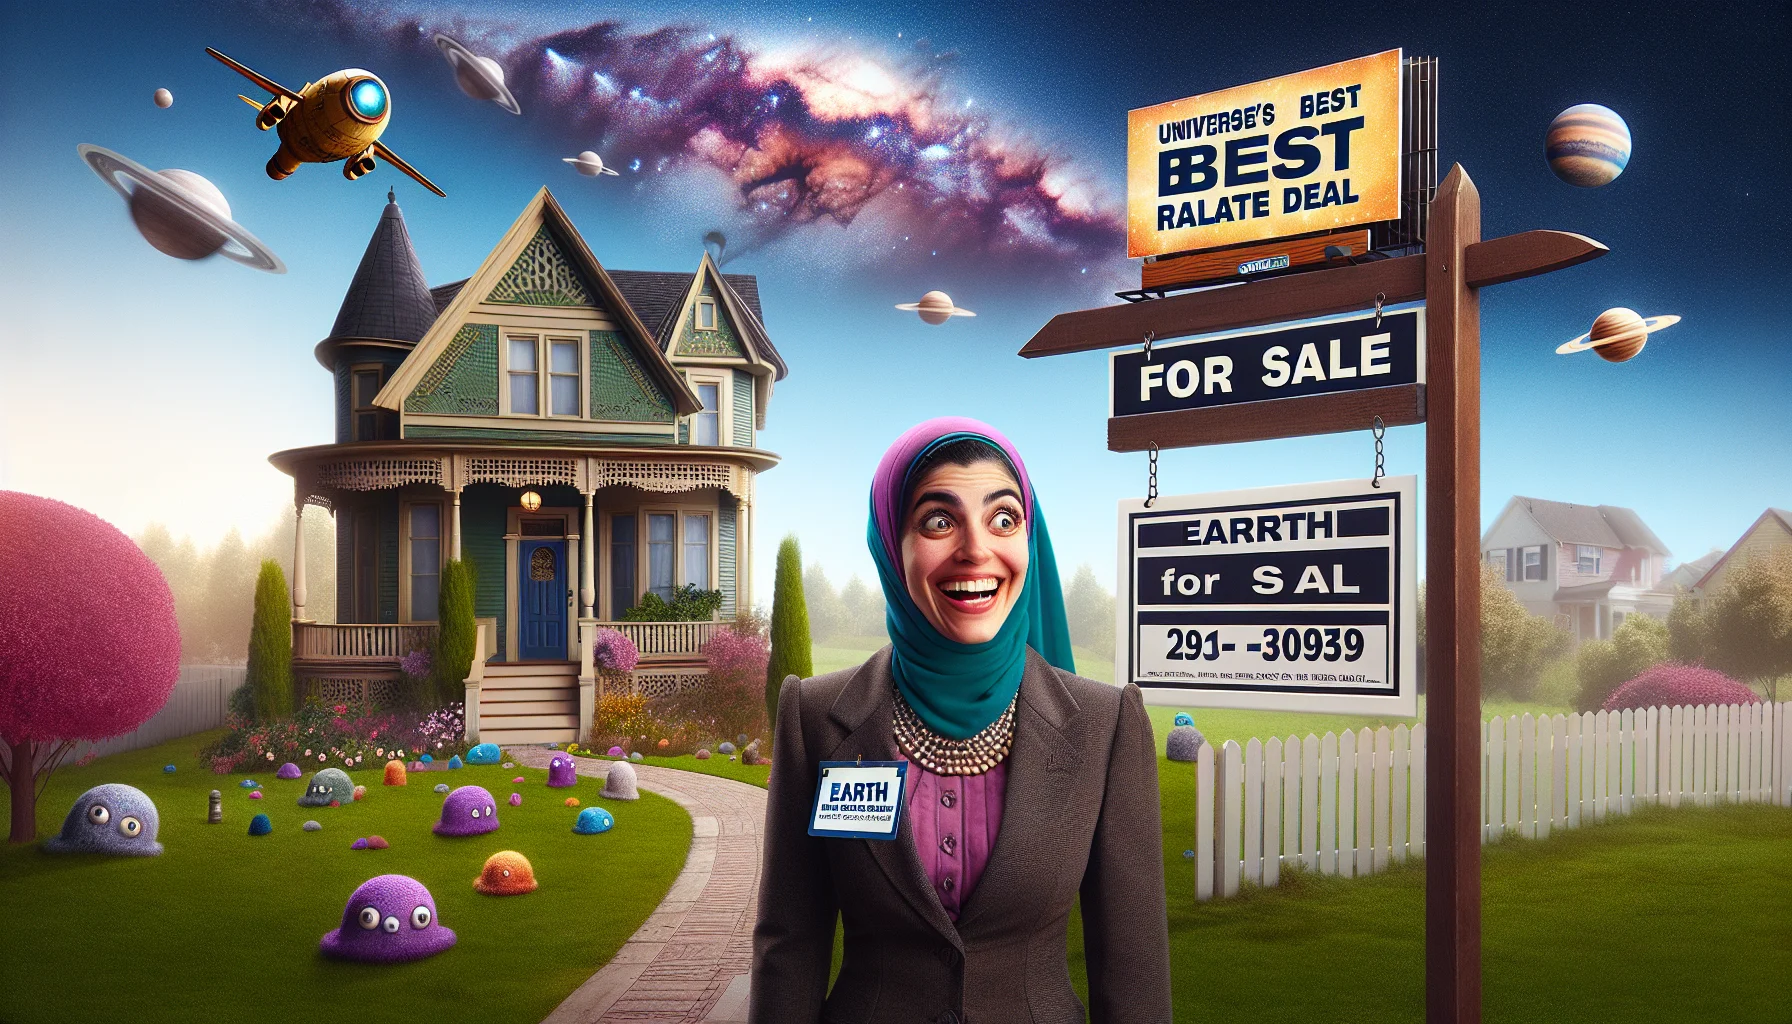 Imagine a humorous and realistic scene of a stellar real estate opportunity. The setting is a postcard-perfect neighborhood with well-manicured lawns, Victorian-style houses with quirky, bright colors, and friendly neighbors. A Middle-Eastern female real estate agent with a wide smile is presenting a 'For Sale' sign that reads 'Universe's Best Real Estate Deal', with an arrow pointing towards an idyllic, charming house with some amusing features - perhaps a tiny spaceship as a mailbox or an alien-shaped topiary. The sky above displays a billboard with 'Earth: The Perfect Neighborhood in the Milky Way’ written on it. Create an atmosphere of joy, optimism and a touch of cosmic humor.